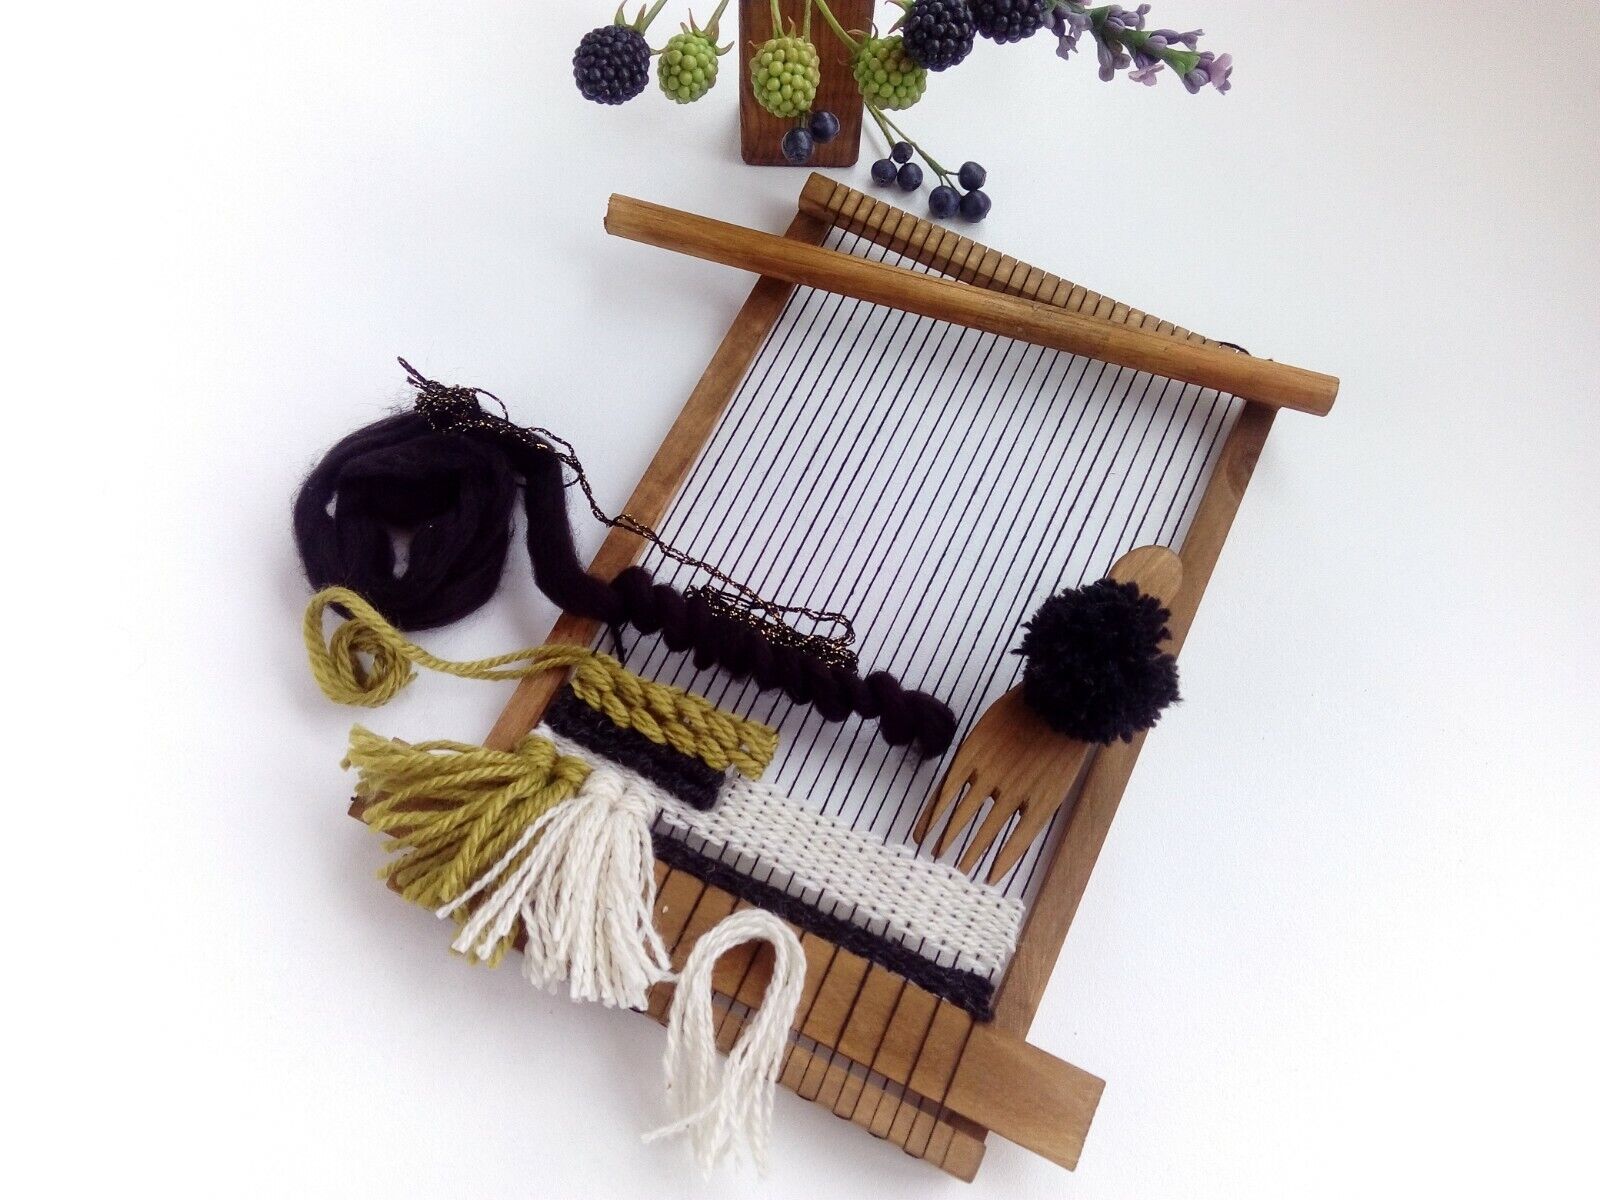 Tapestry Weaving Kit for Adults Weaving Frame Loom with Yarn and